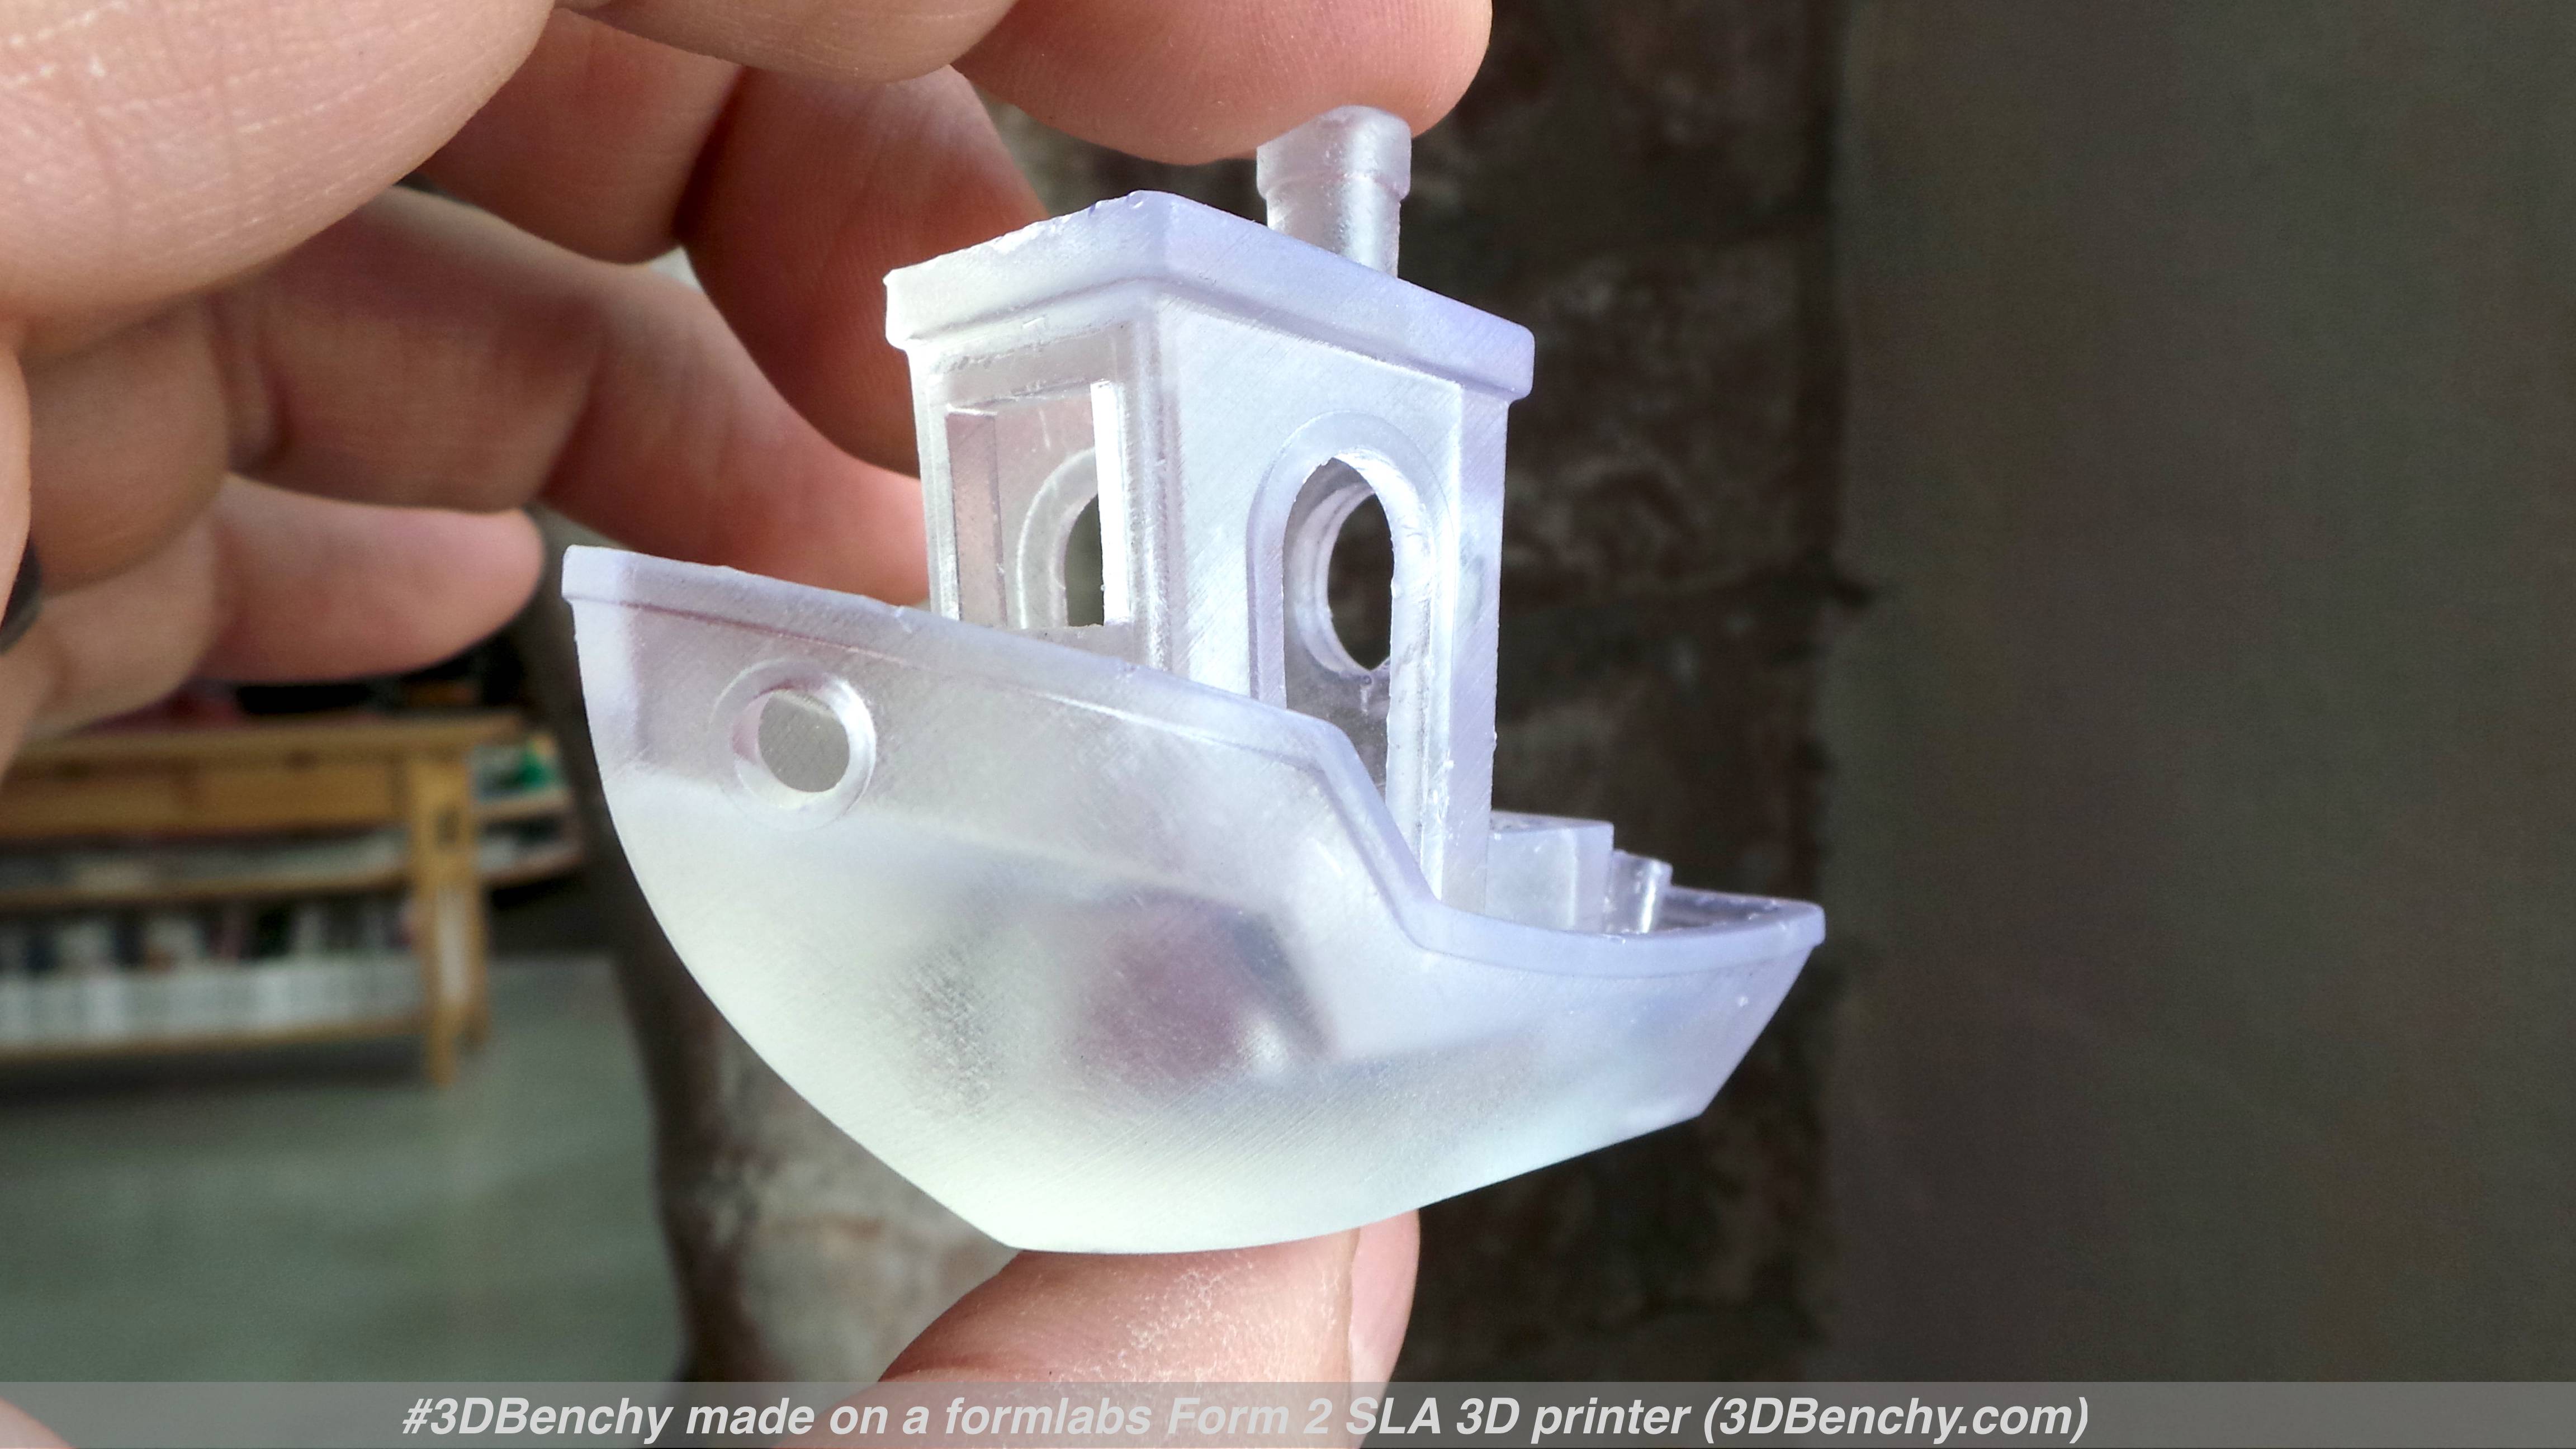 The Form makes a #3DBenchy –